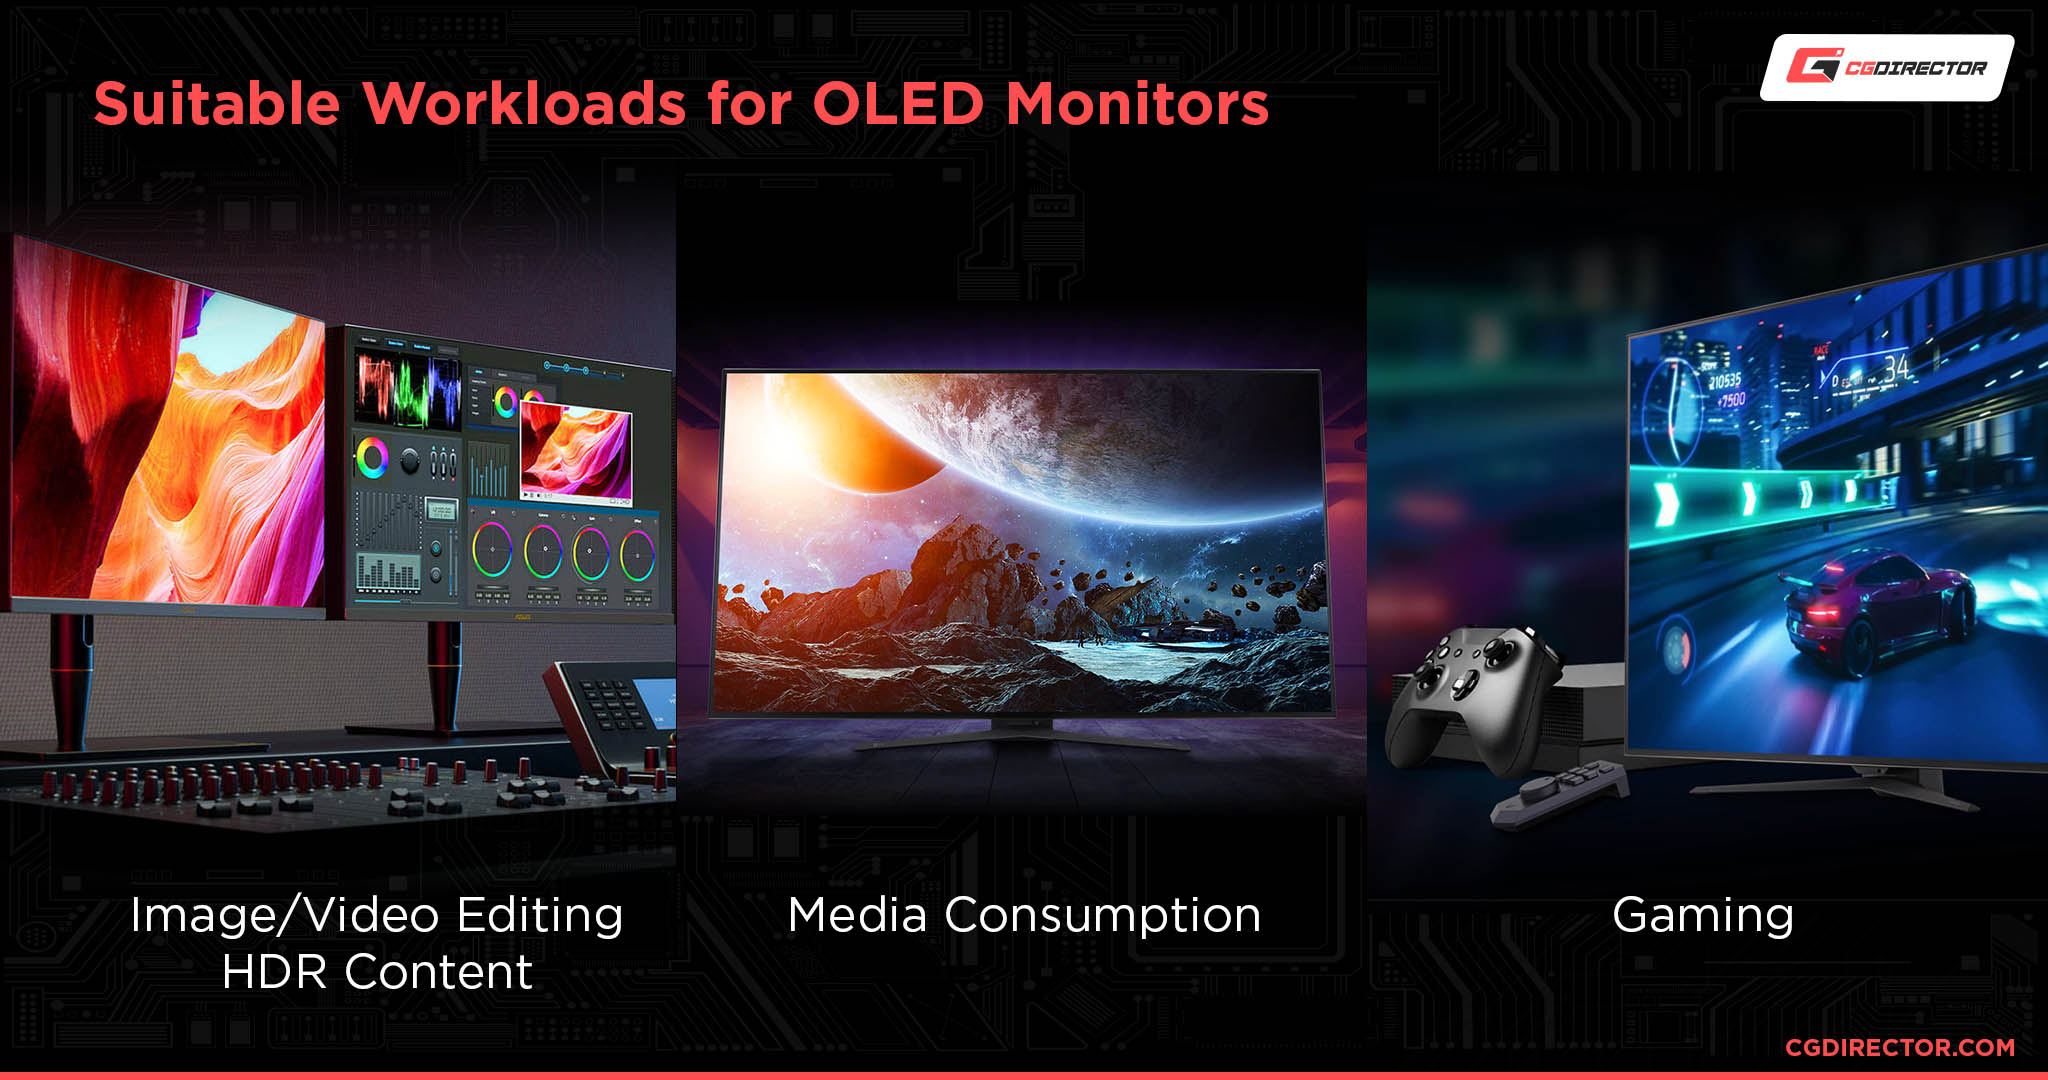 Suitable Workloads for OLED Monitors